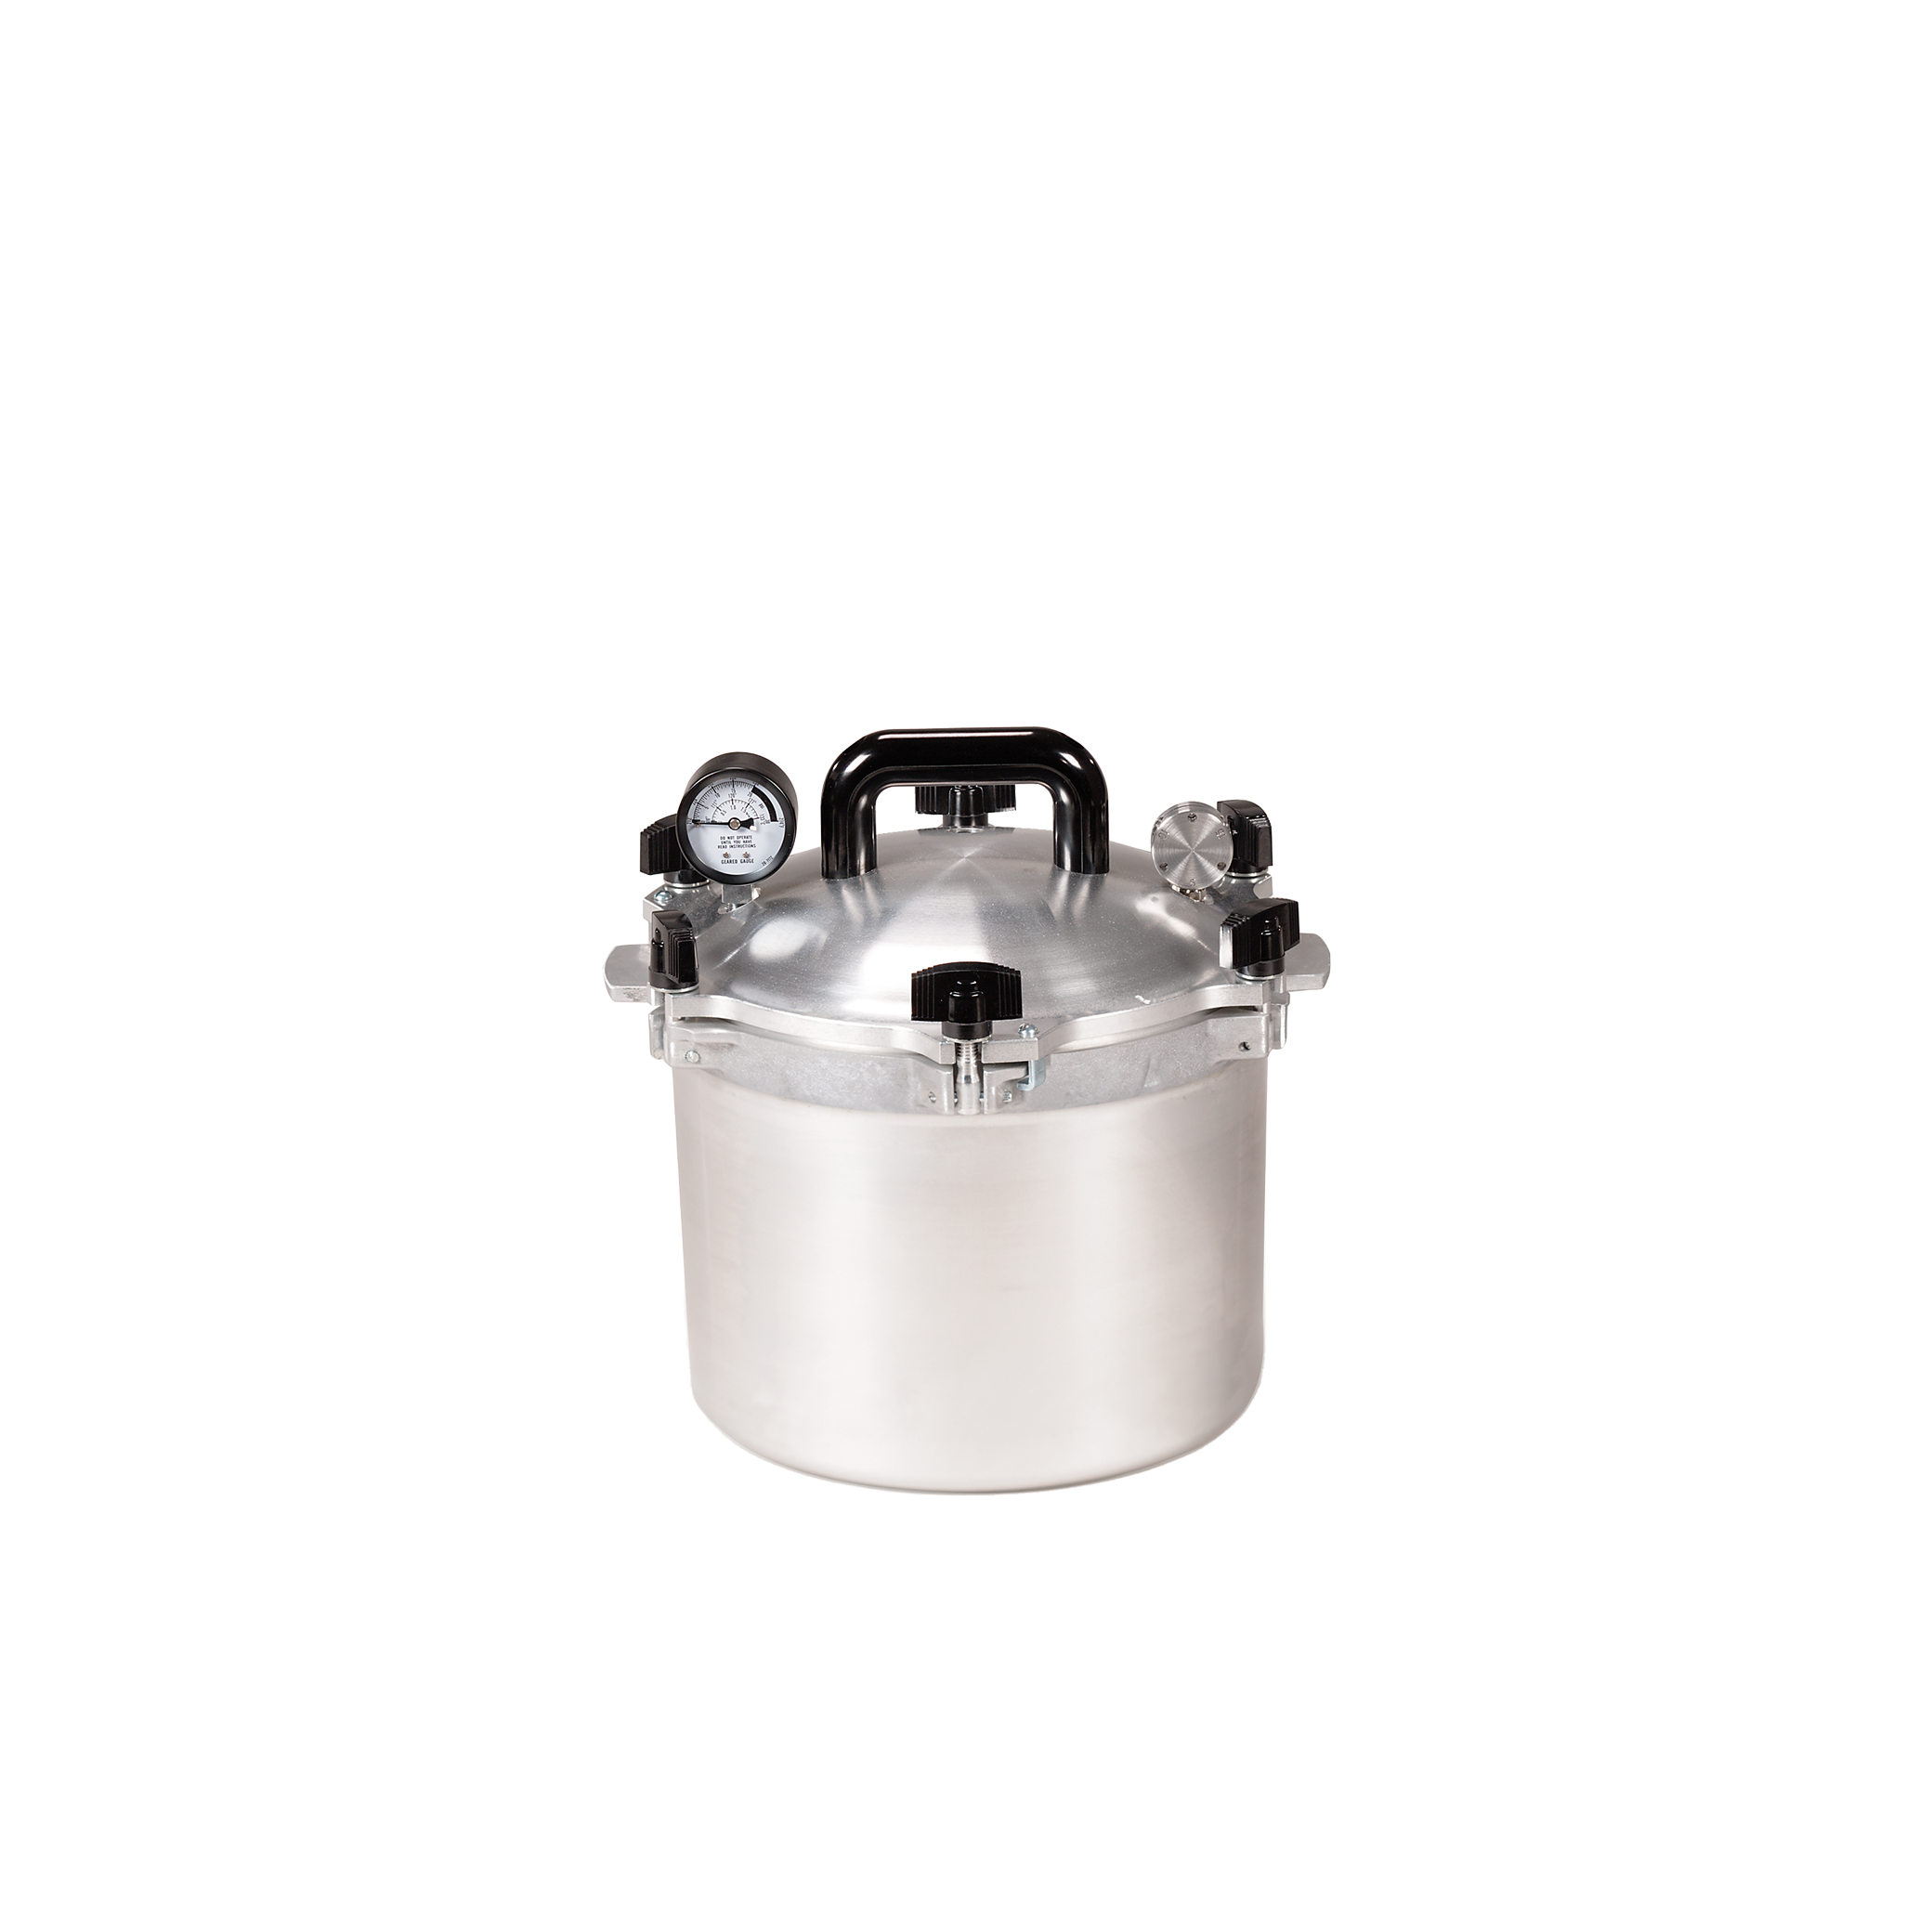 https://www.leftcoastwholesale.com/wp-content/uploads/2023/06/All-American-910-Pressure-Cooker.png